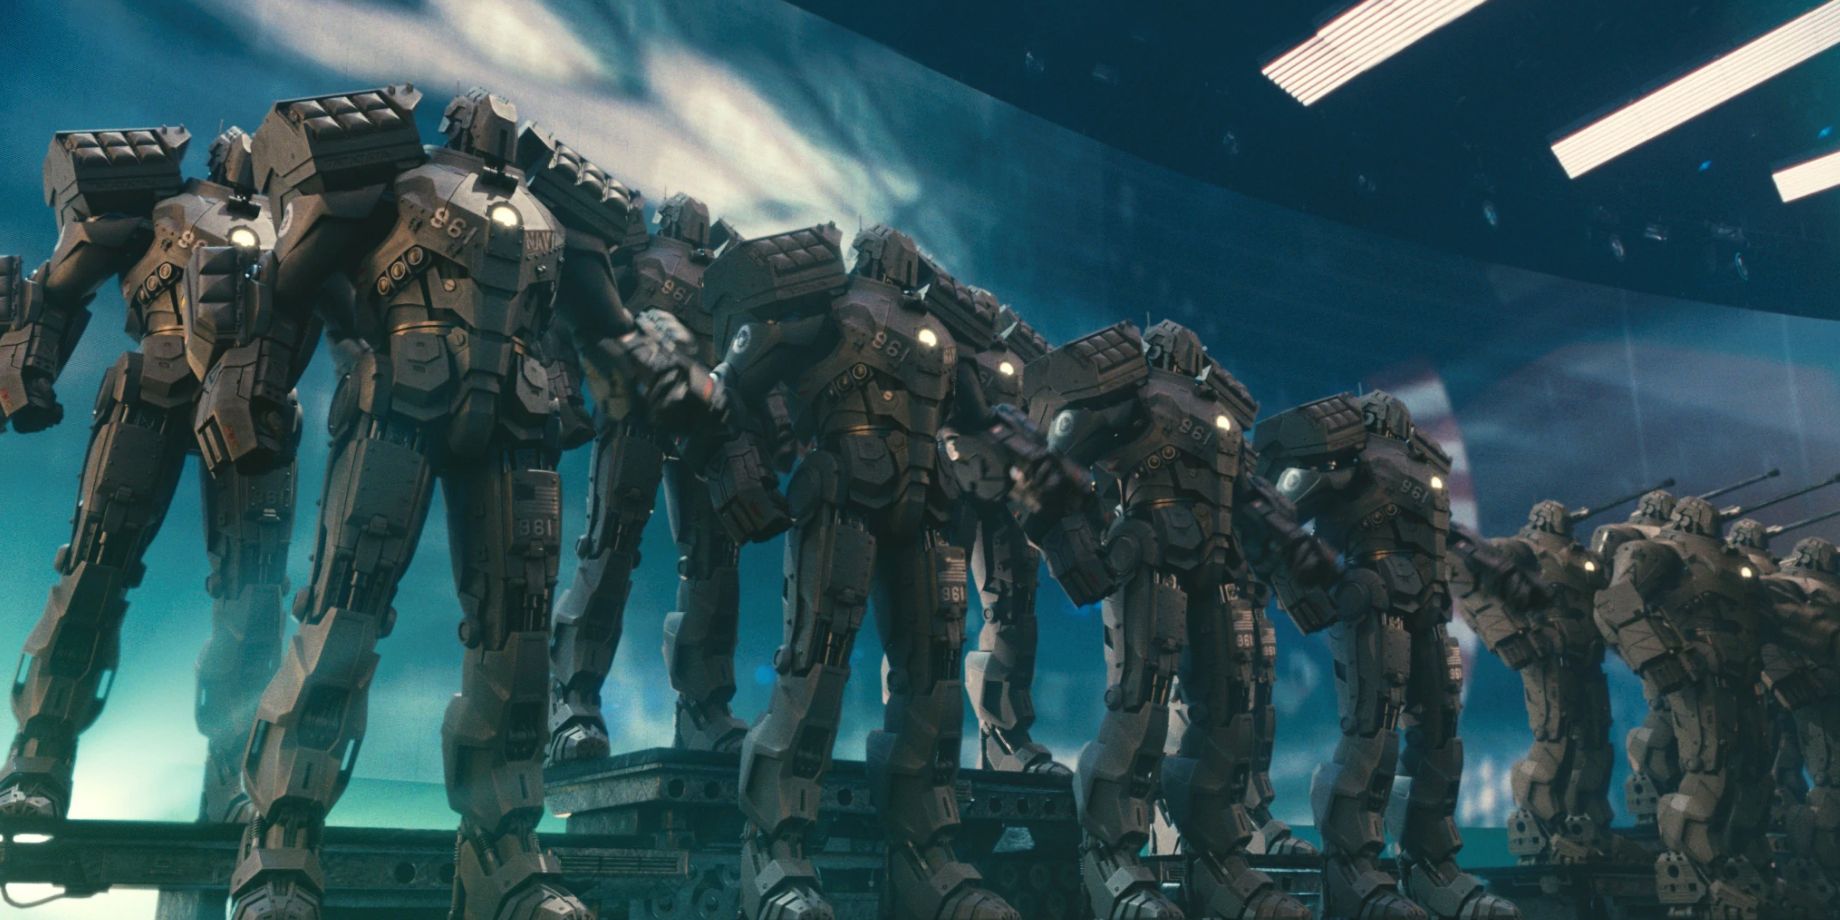 Hammer drones line the stage in Iron Man 2